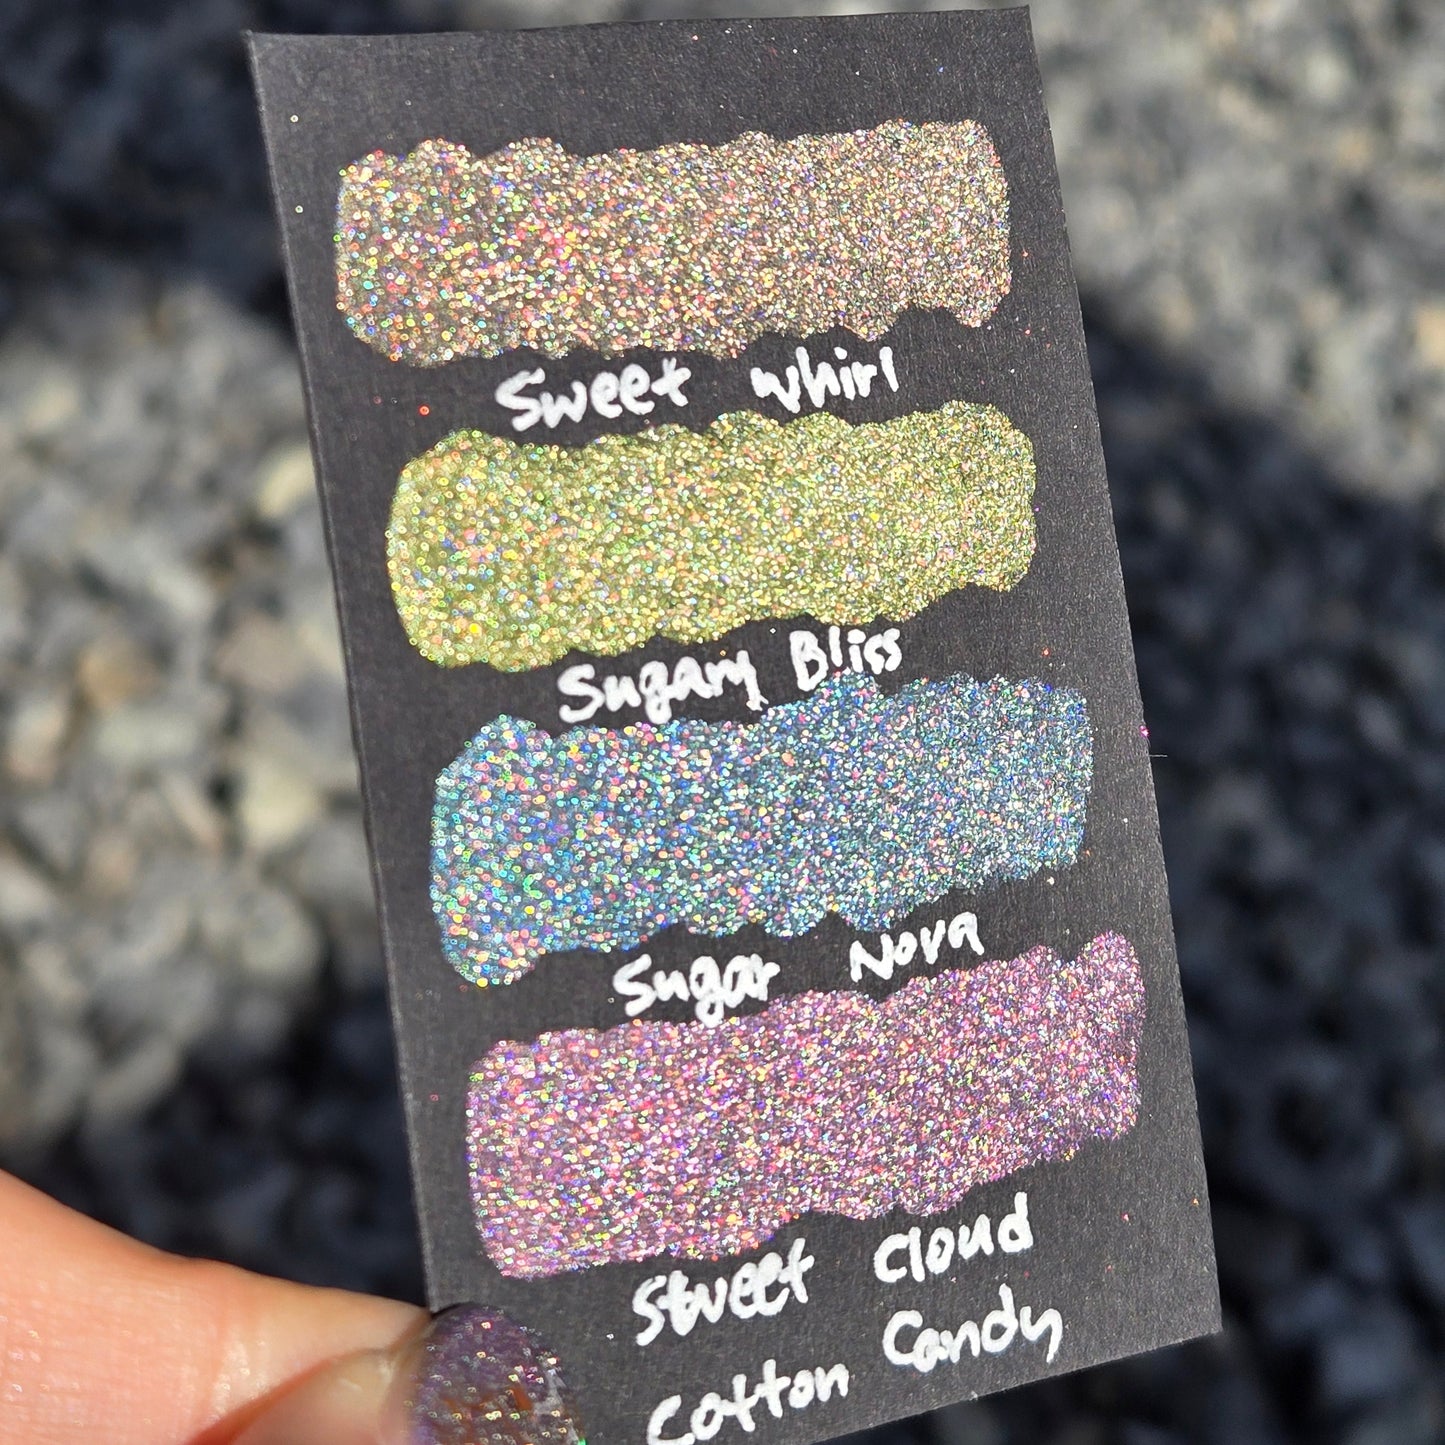 Sugar Nova Half Pan Cotton Candy Handmade Chrome Shimmer Holographic Watercolor Paints by iuilewatercolors